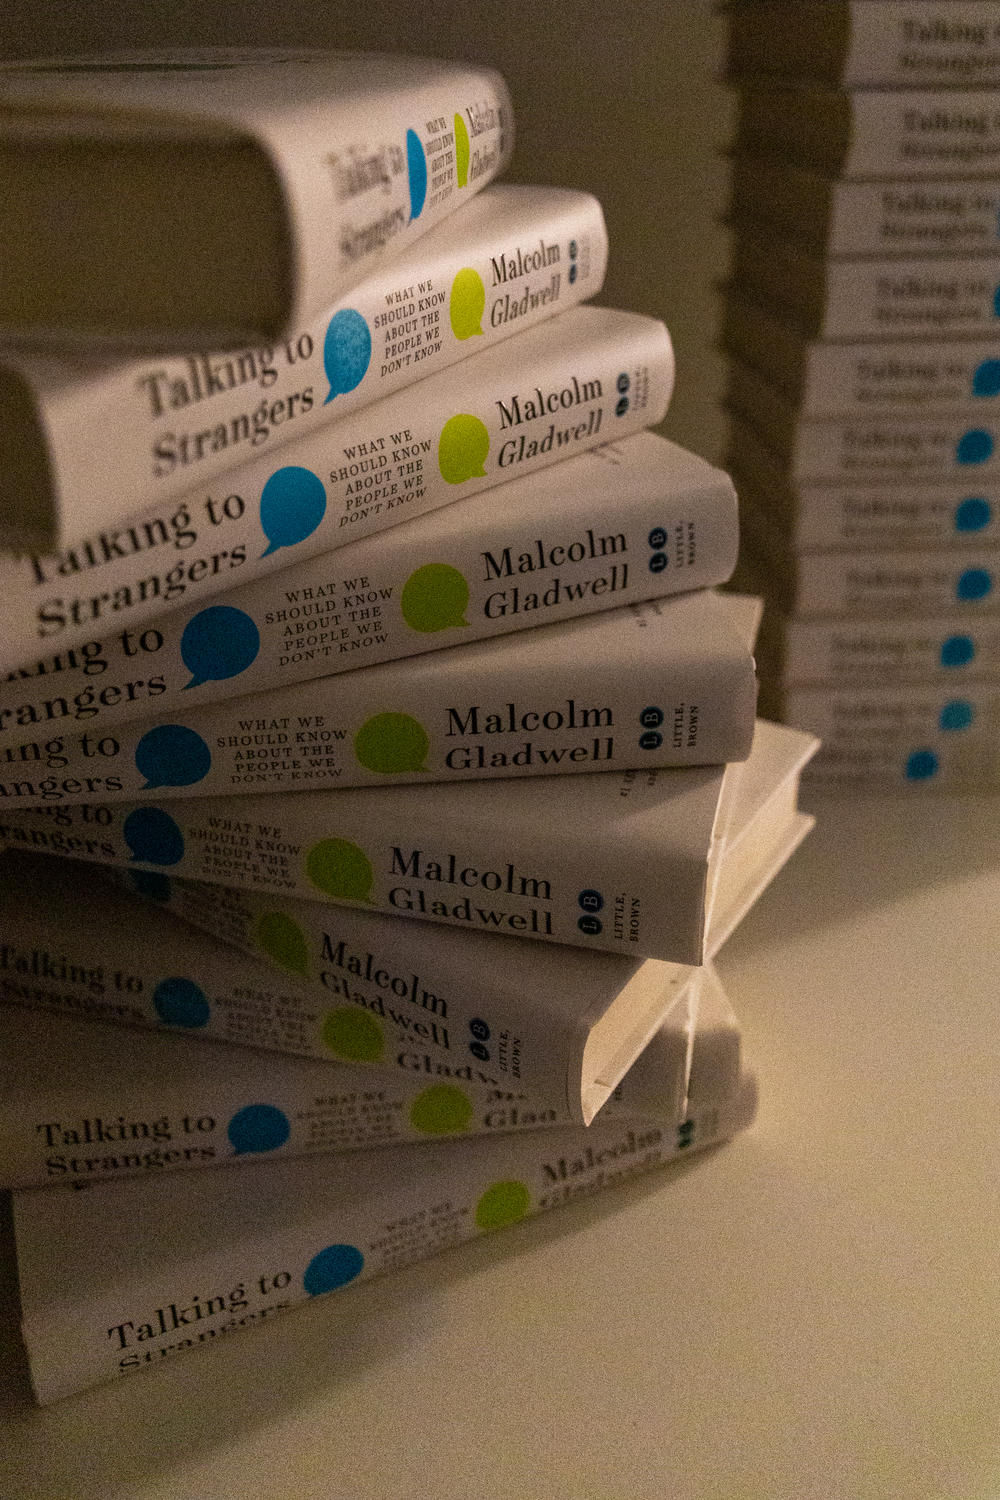 A collection of Malcolm Gladwell's newest book, "Talking to Strangers."